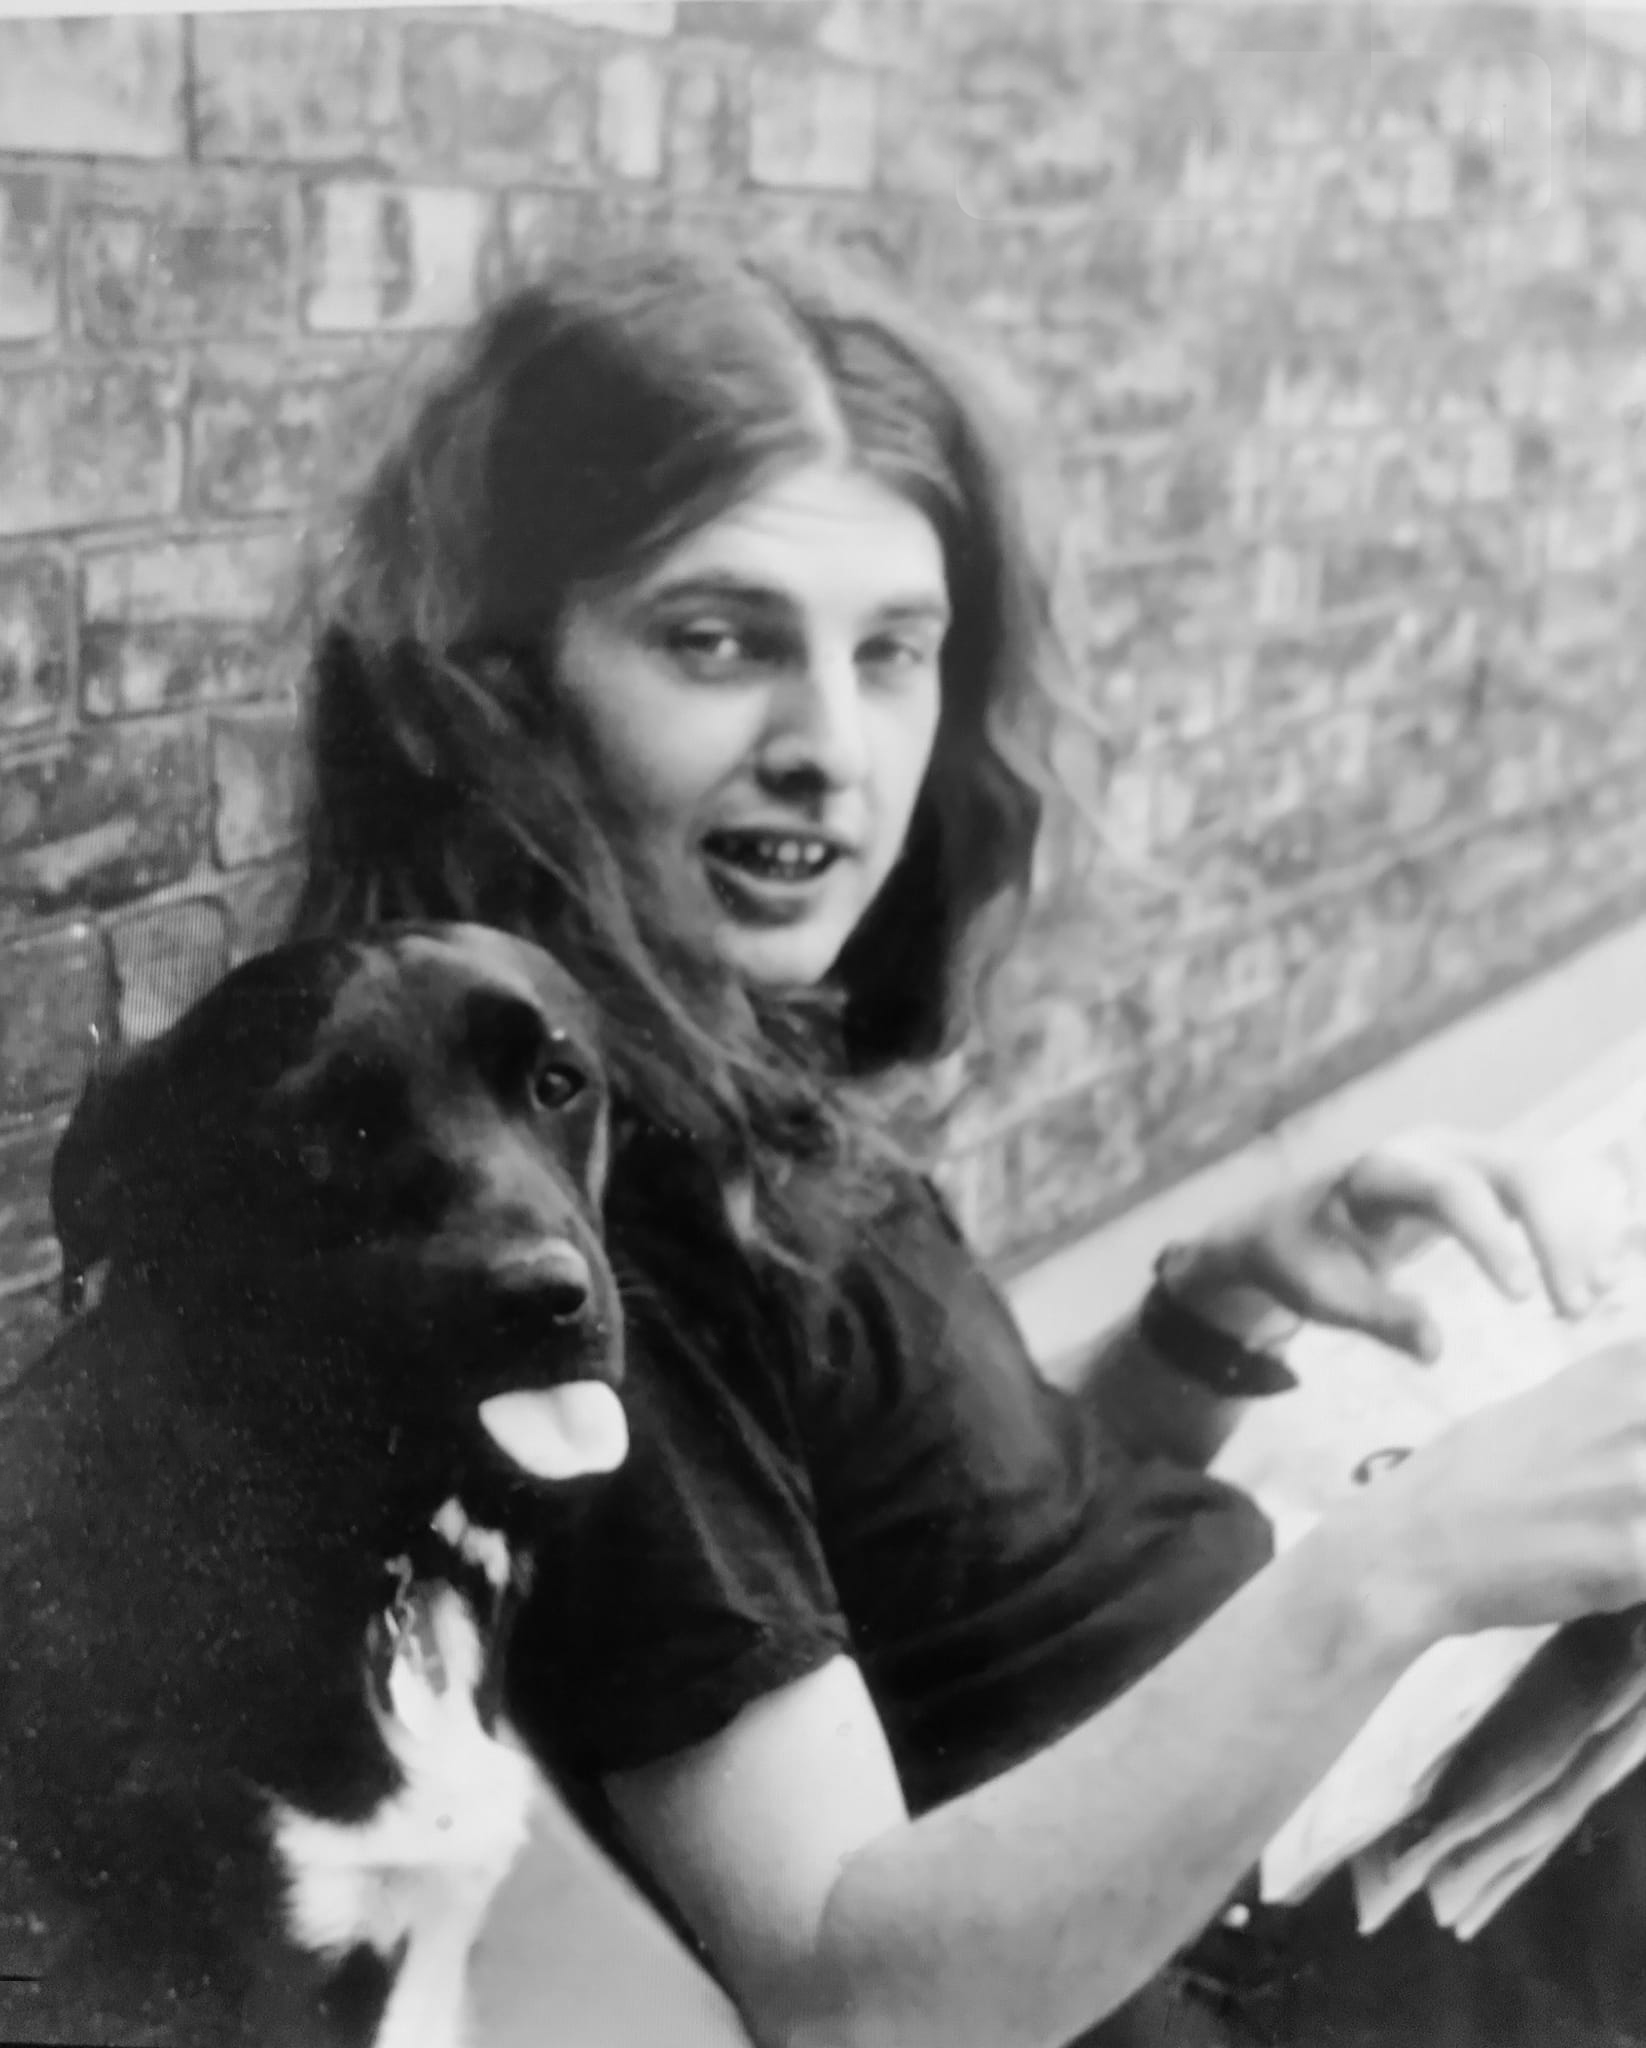 A black and white portrait of John Scott as a young person with long, wavy brown hair sitting beside a black dog with a brick wall behind.